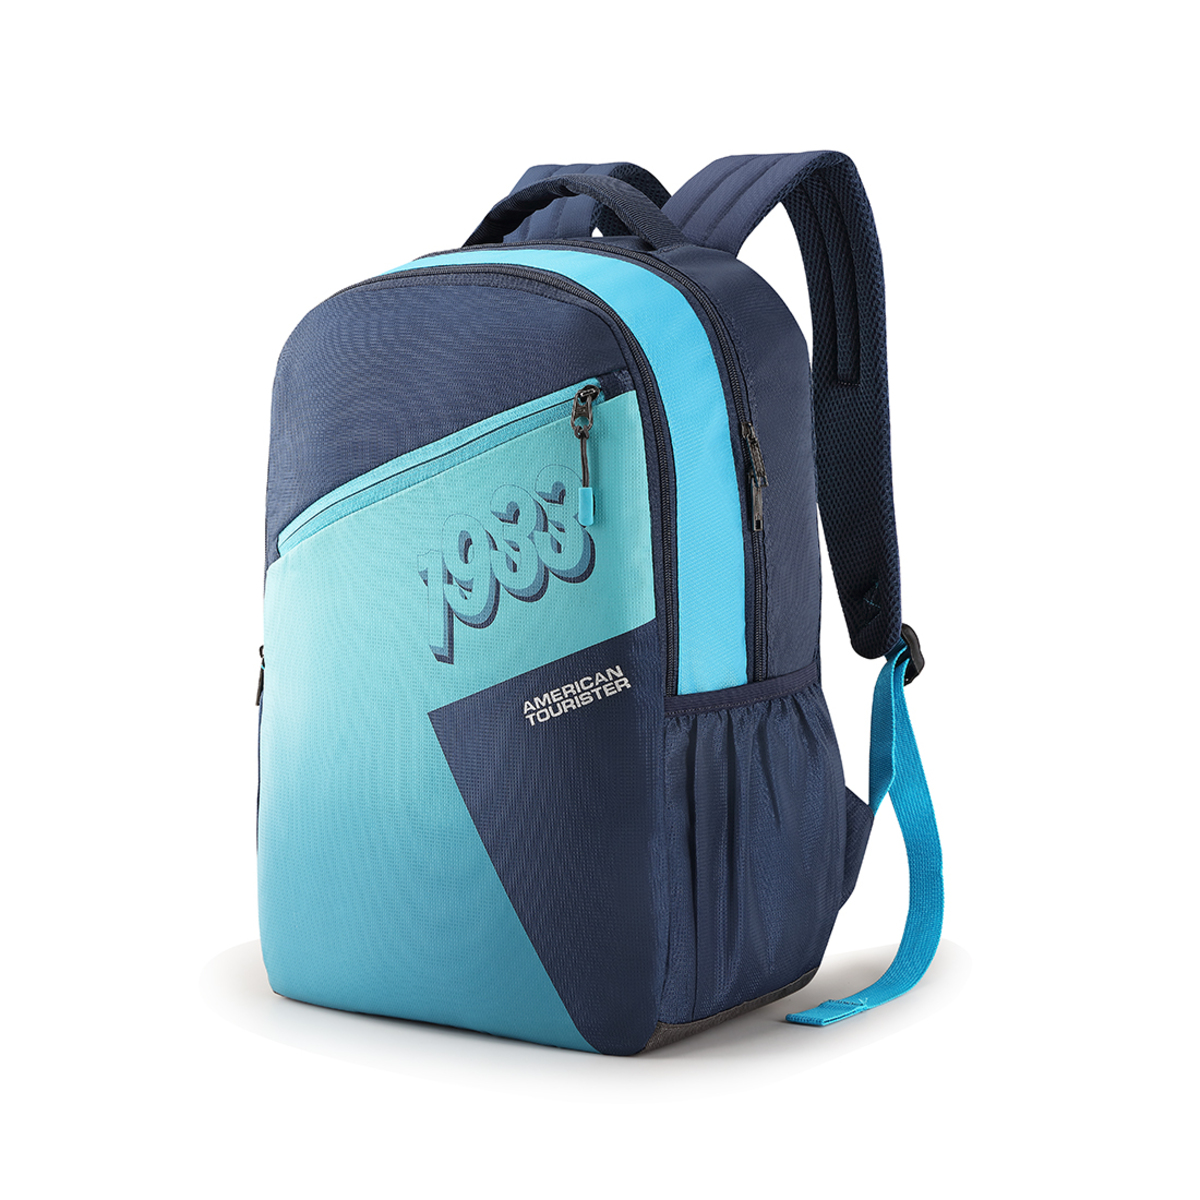 American Tourister Back Pack Twing 01 Blue